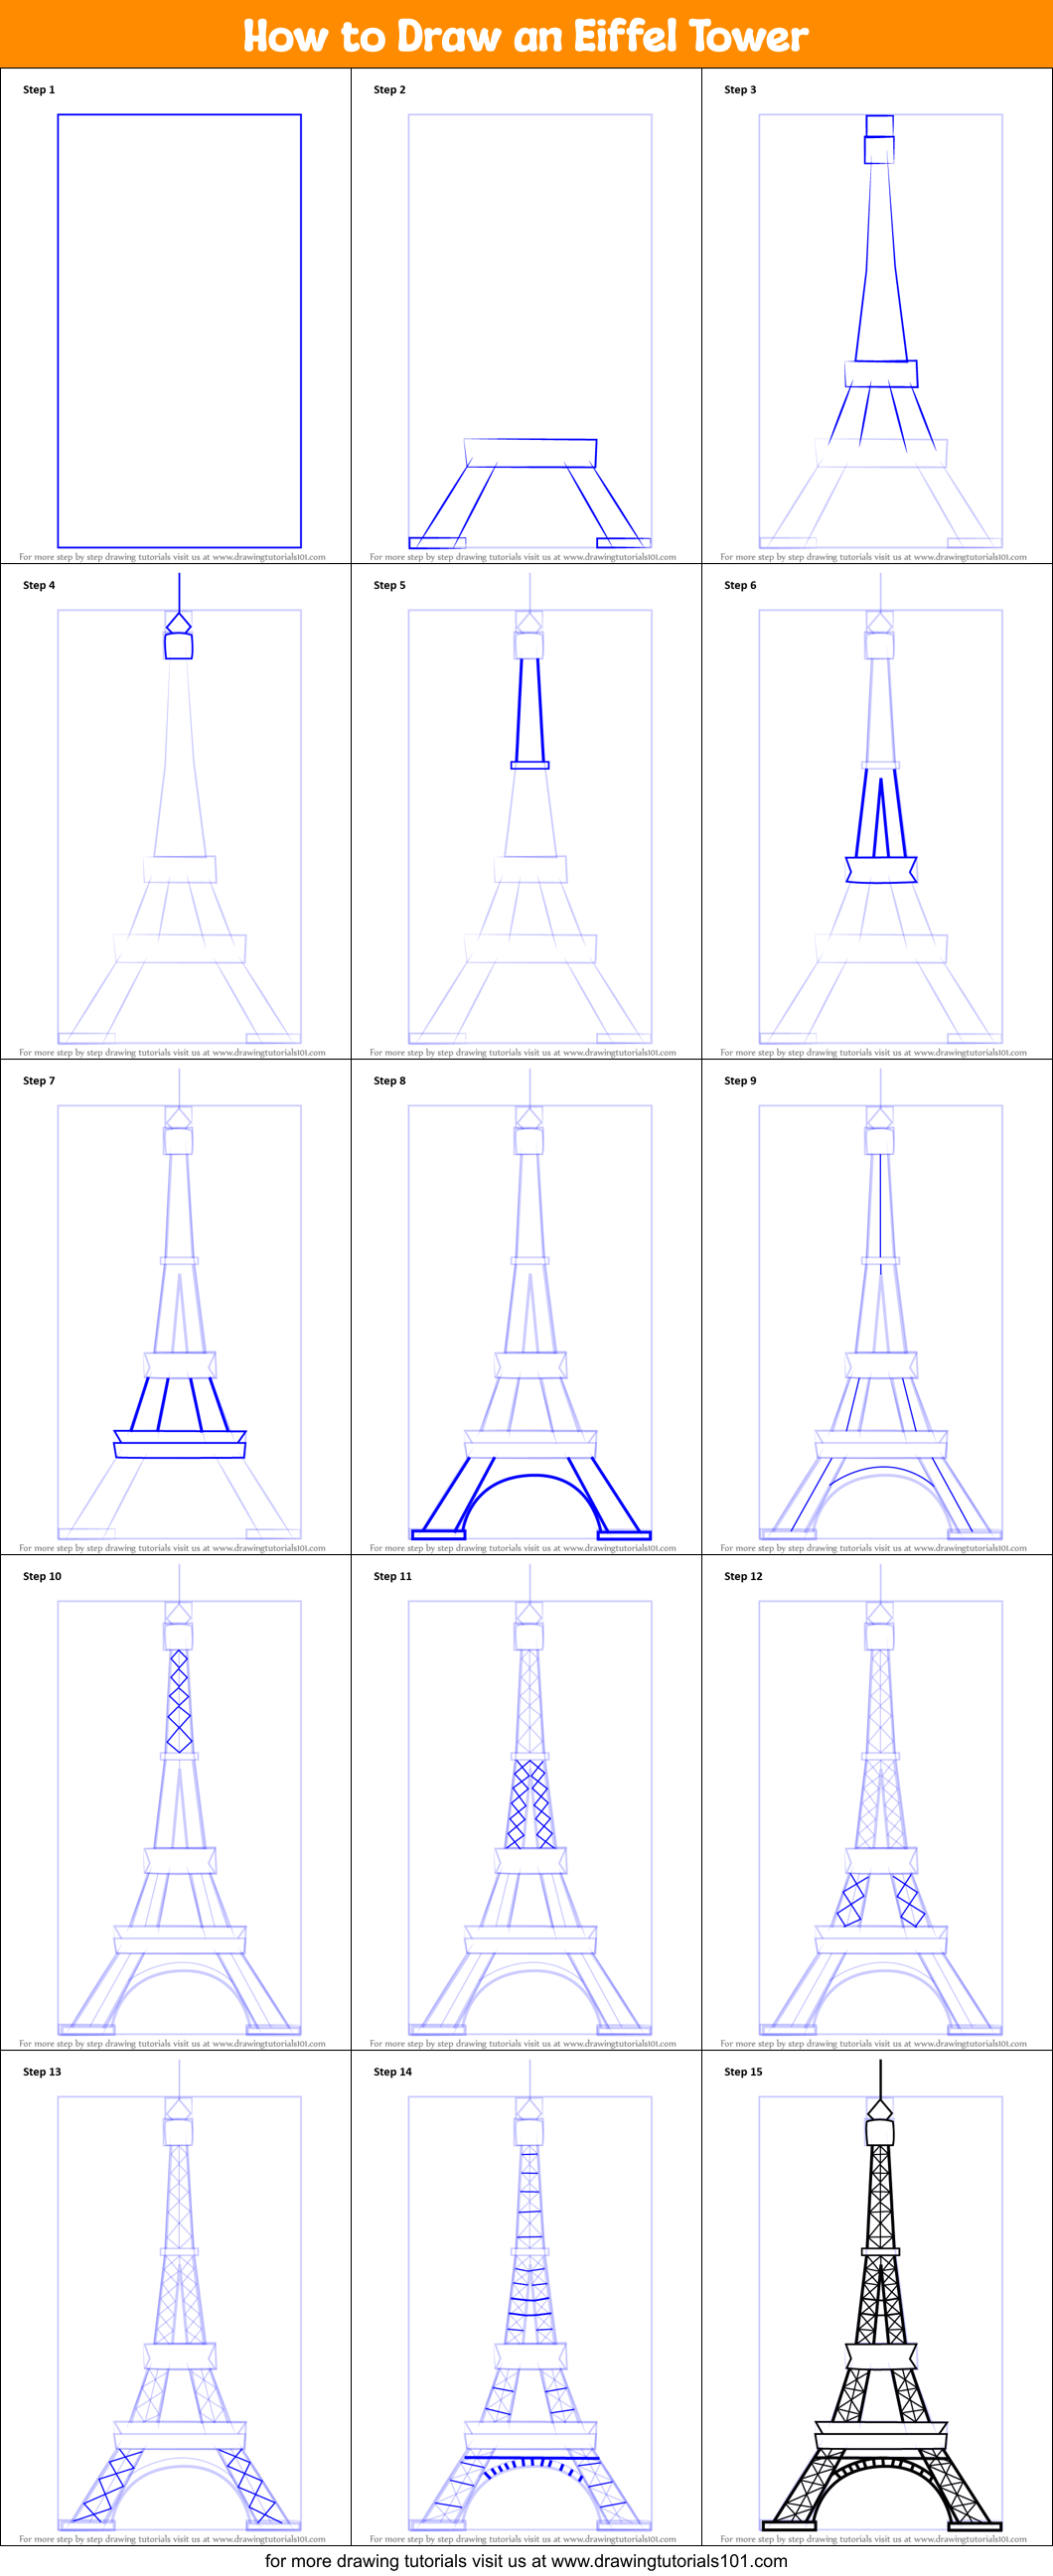 How to Draw an Eiffel Tower printable step by step drawing sheet